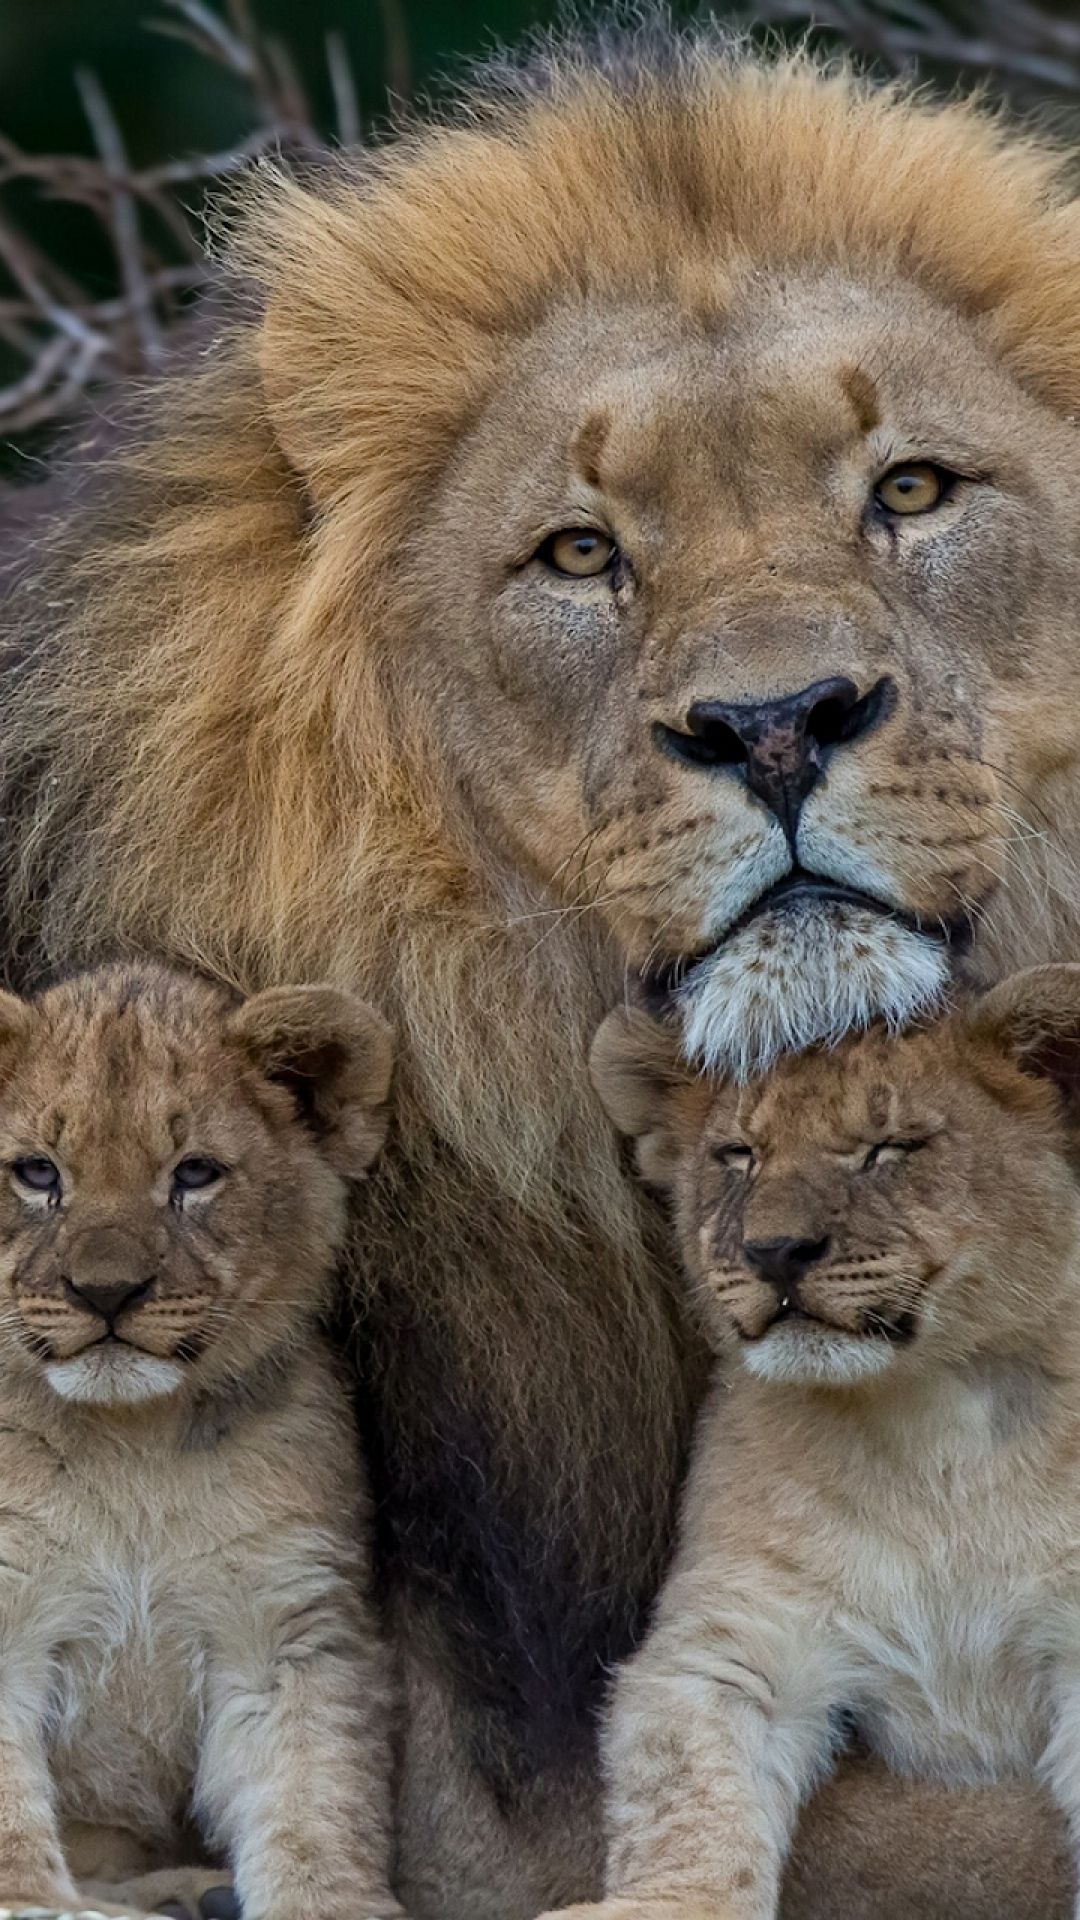 Lion And 2 Cubs - HD Wallpaper 